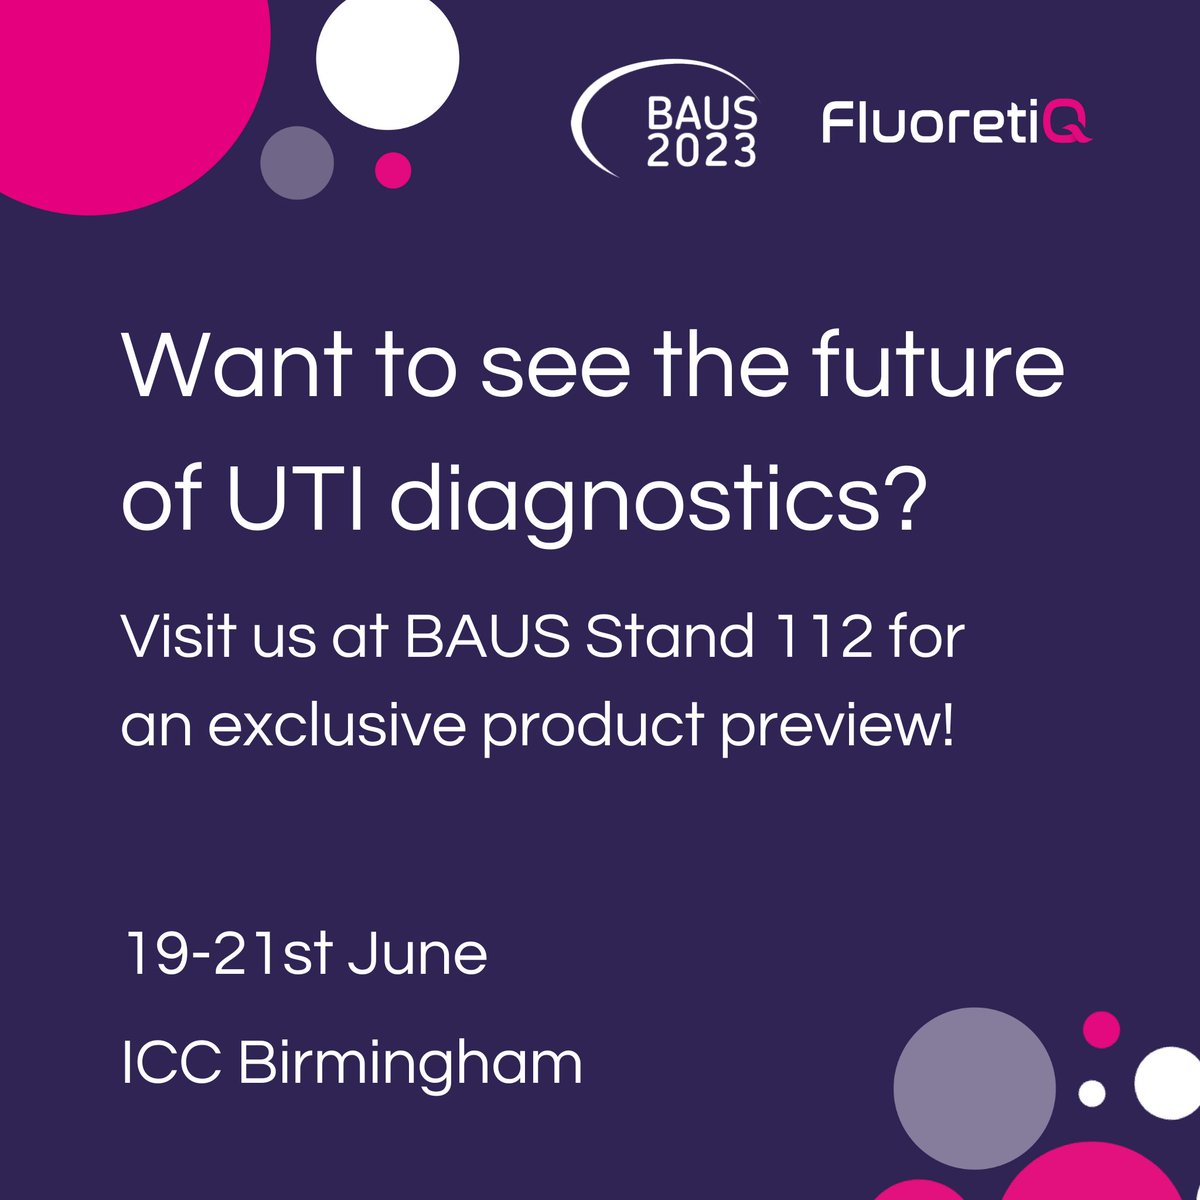 Want to see the future of UTI diagnostics? Visit us at BAUS Stand 112 for an exclusive product preview! @BAUSurology @kasraparsy #Diagnostics #AMR #BAUS23 #Urology